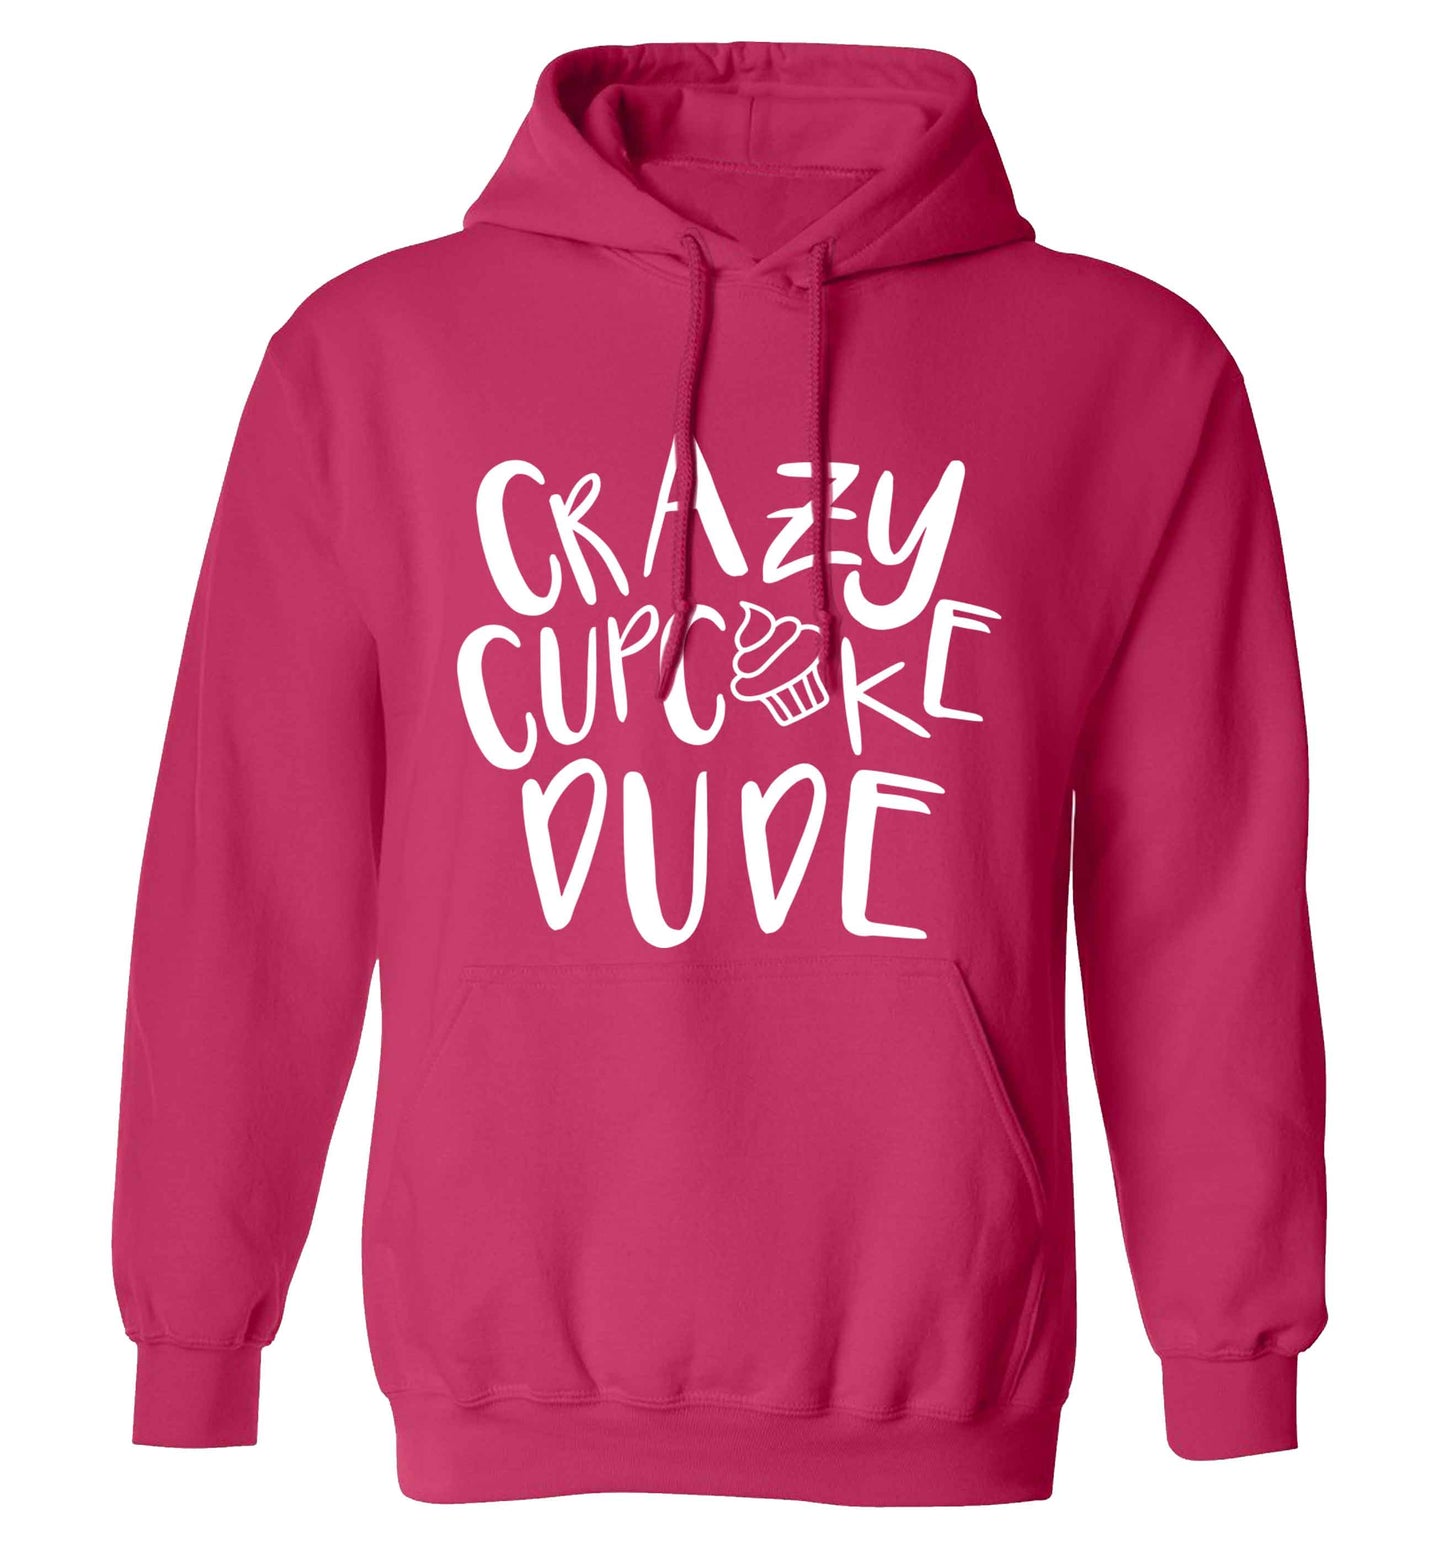 Crazy cupcake dude adults unisex pink hoodie 2XL